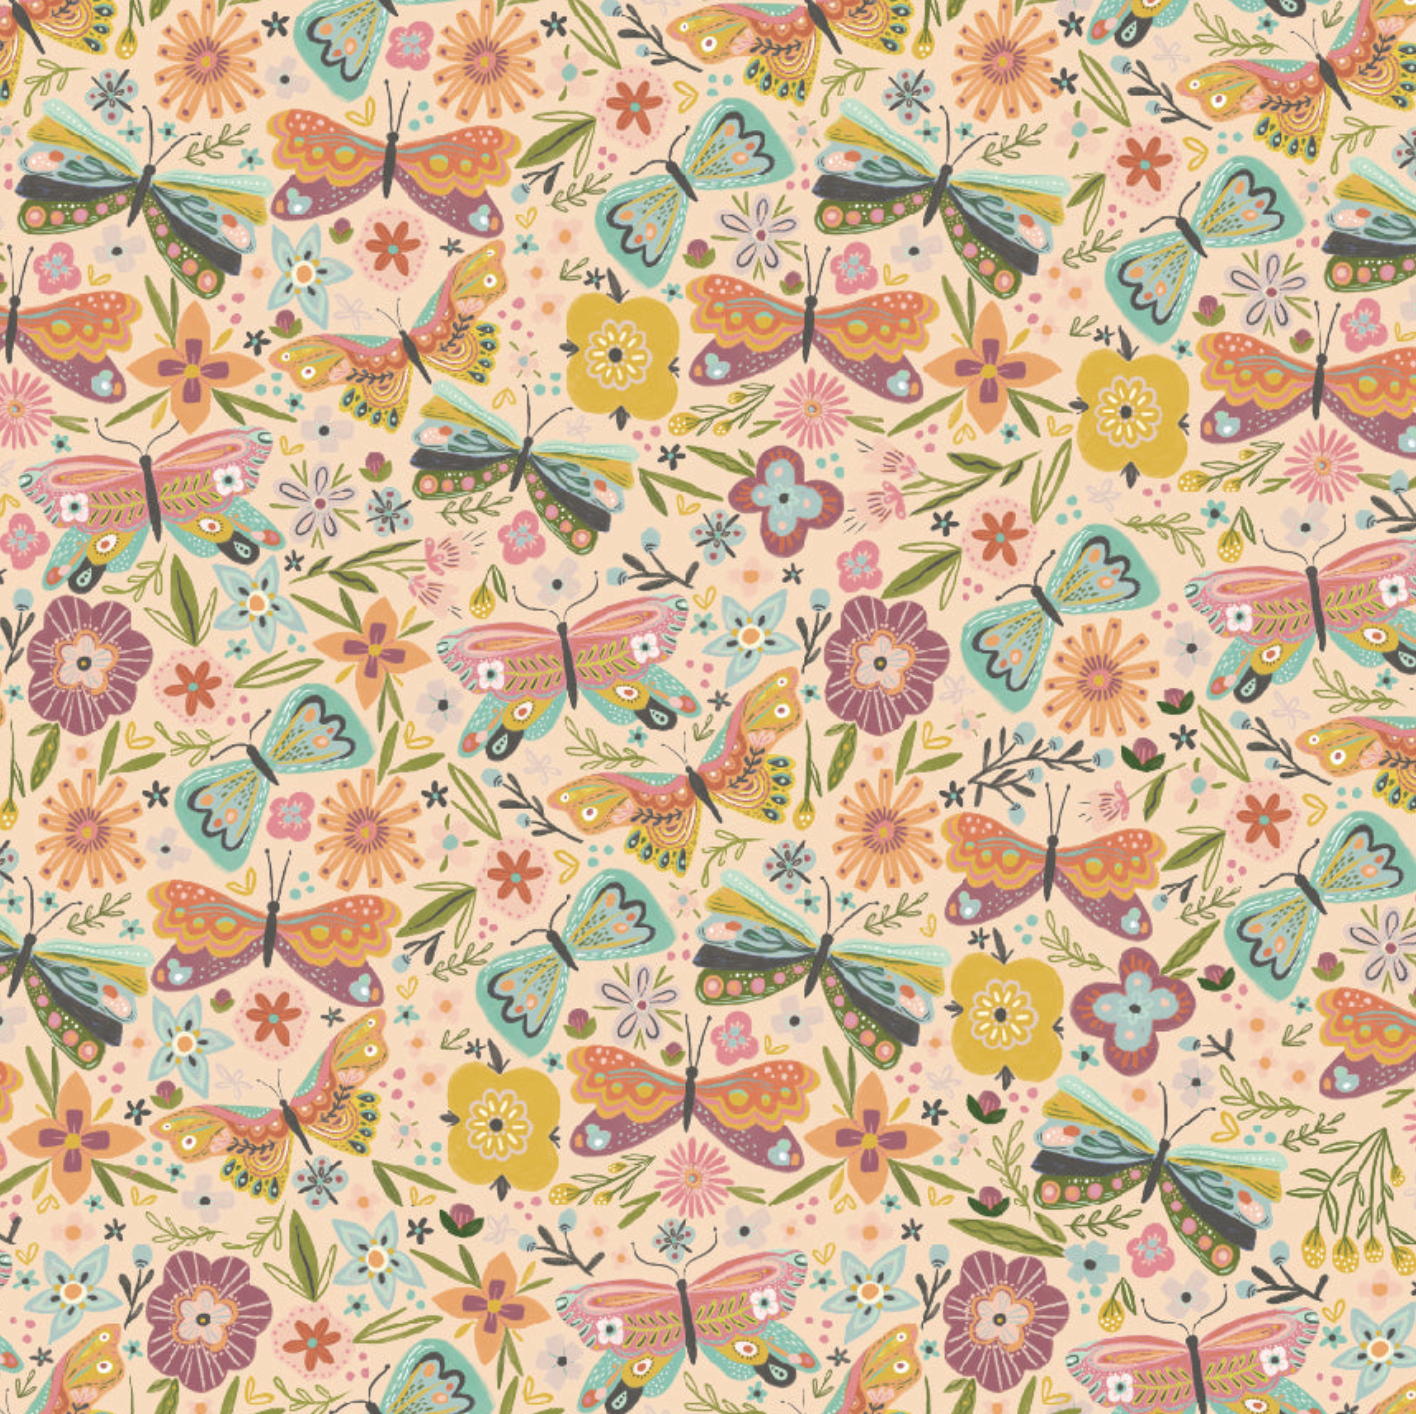 Cottage Charm, Butterfly Blossom Peach CH24745, sold by the 1/2 yard, *PREORDER